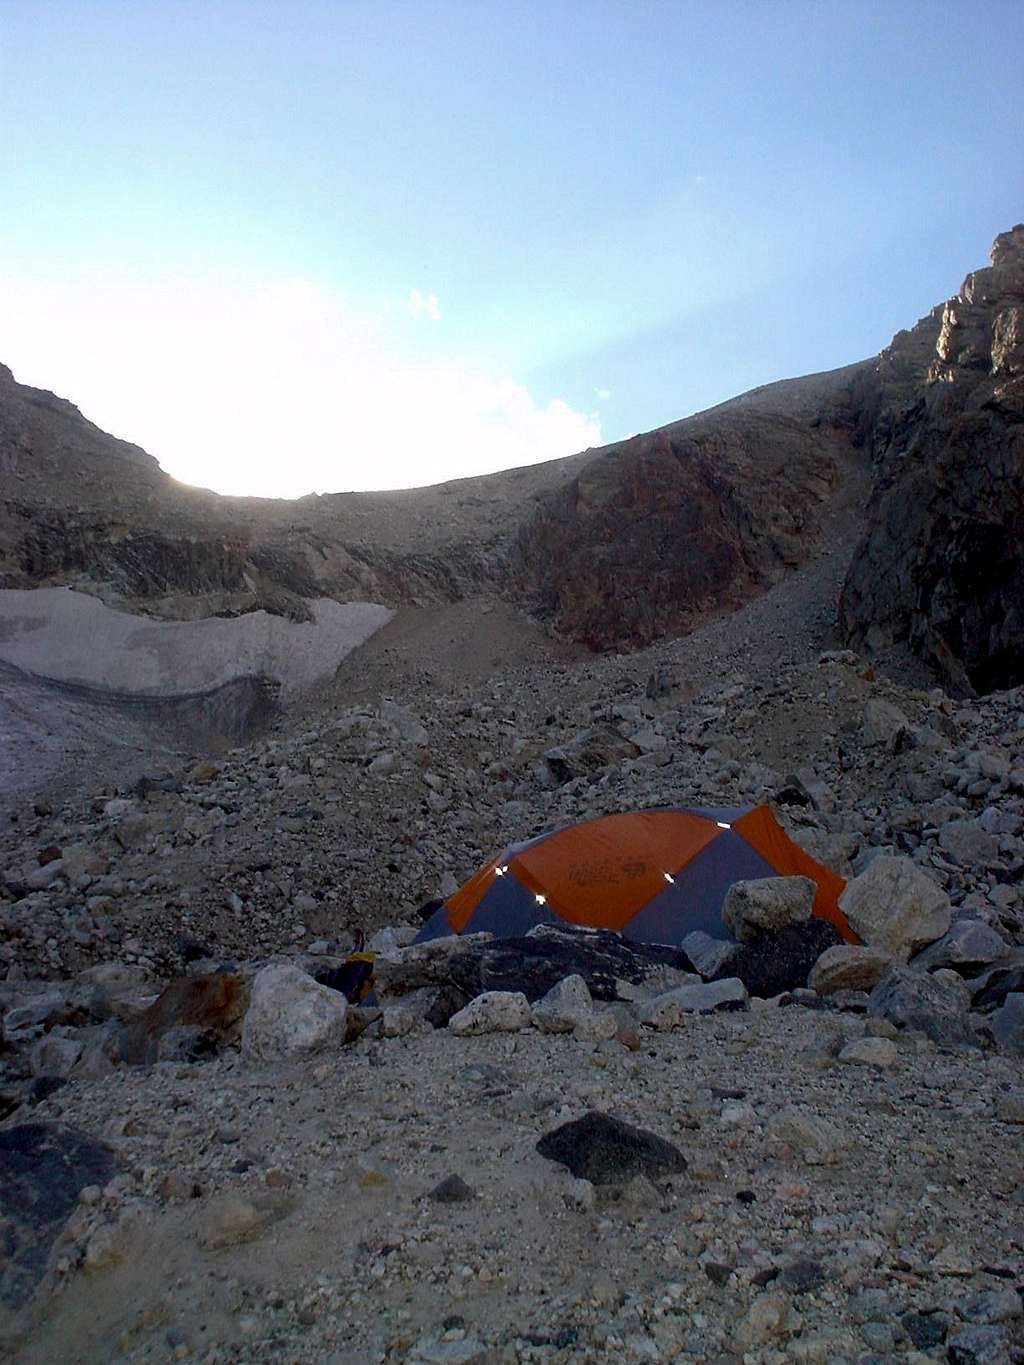 Camping in the Moraine